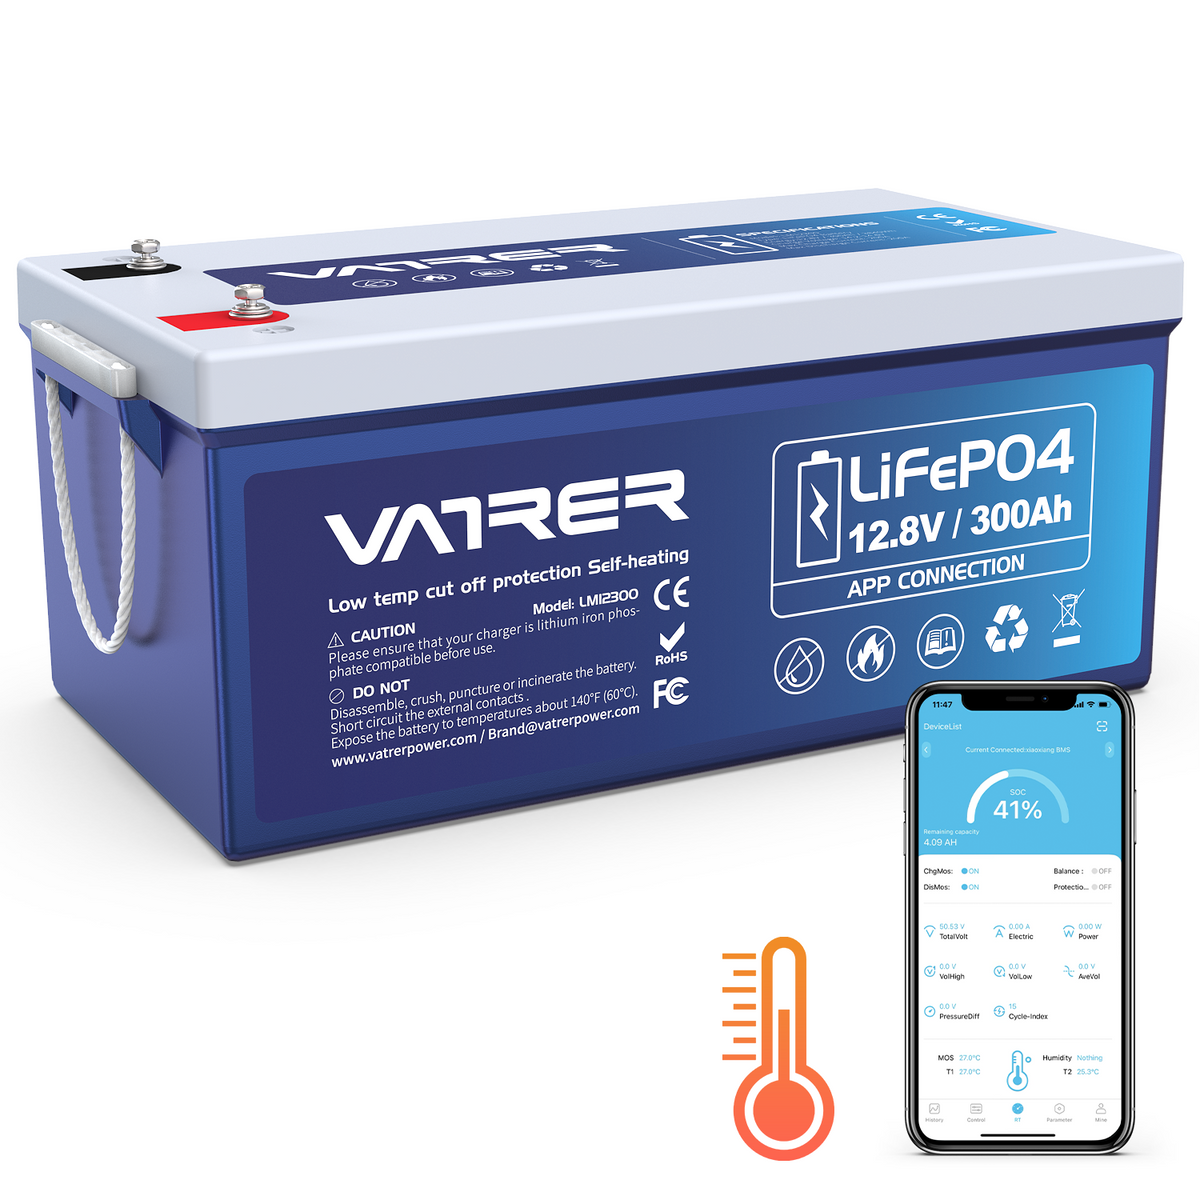 Vatrer 12V 300AH Bluetooth LiFePO4 Lithium Battery with Self-Heating